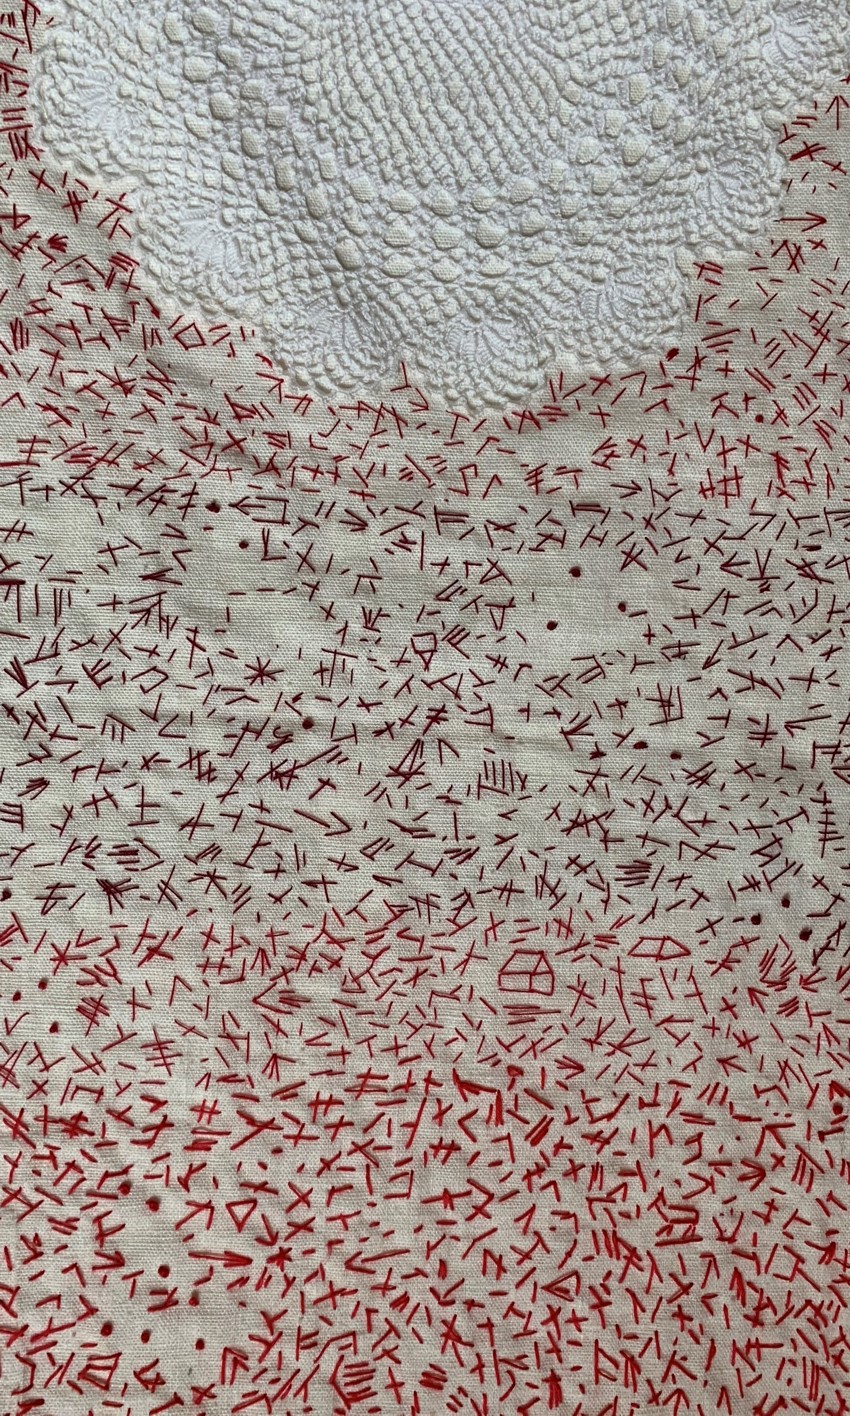 Improvised hand embroidery on fabric and paper